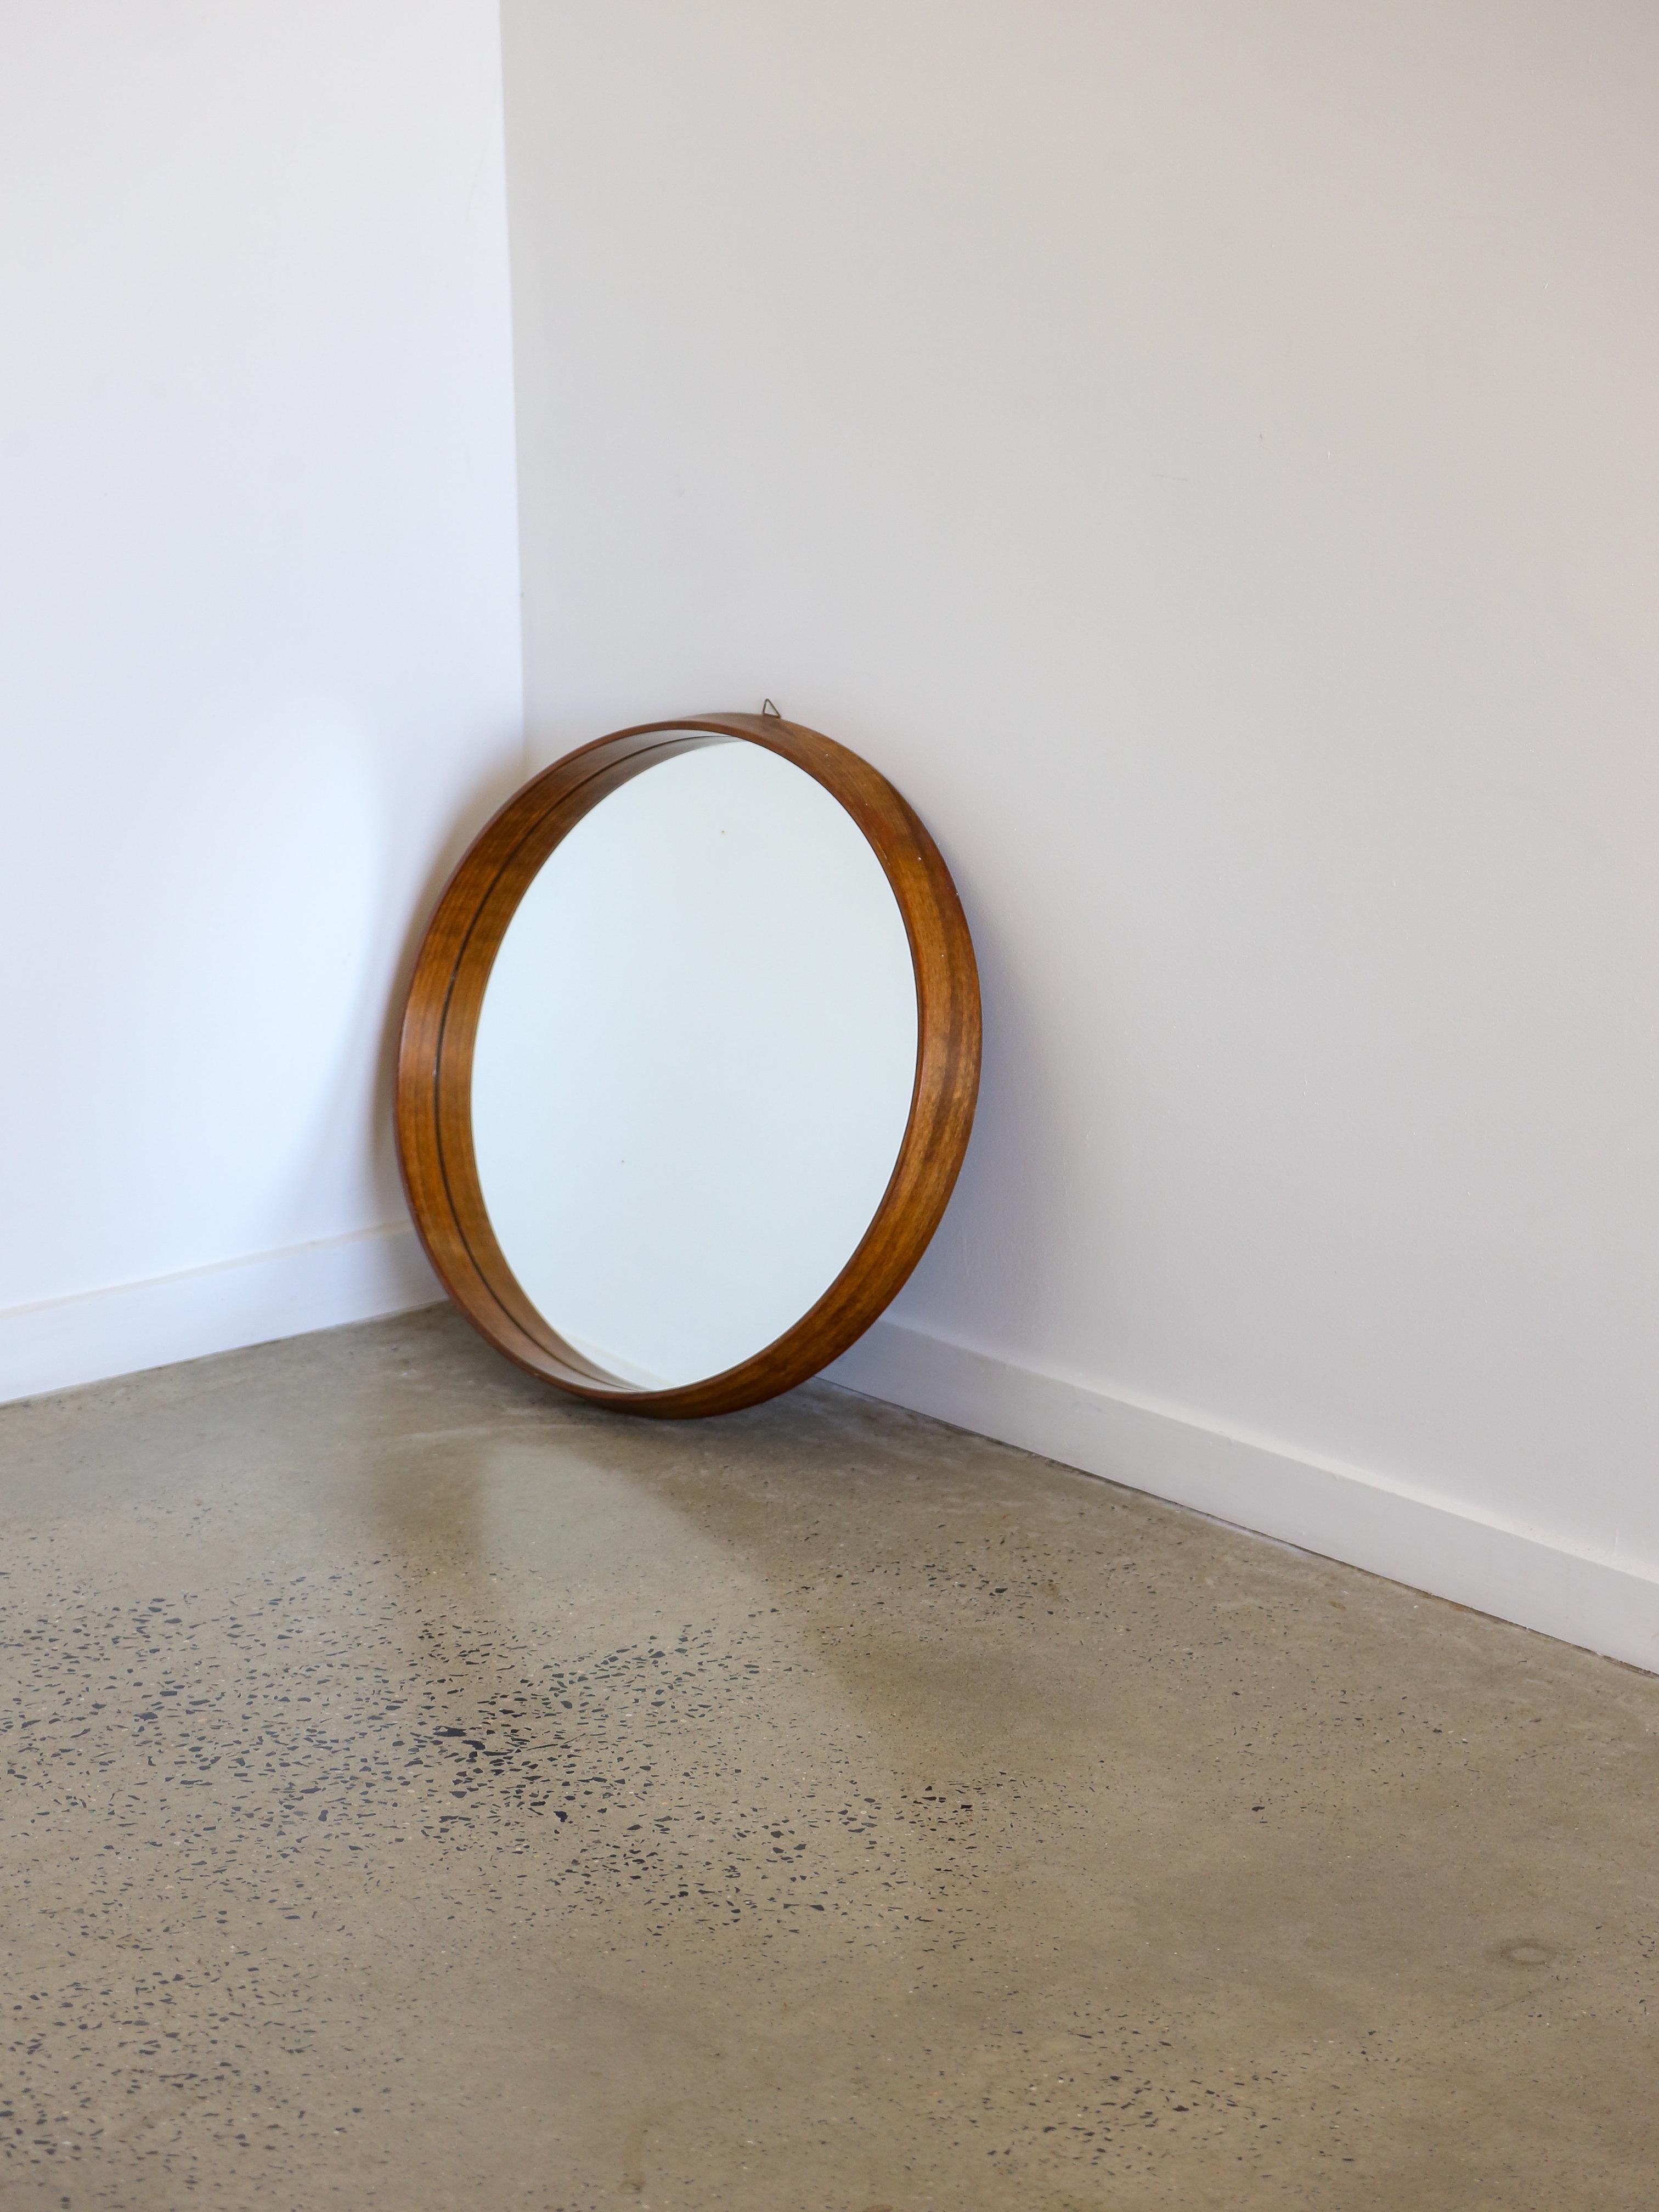 Italian Mid Century Modern round wall mirror.

The frame of the mirror is made from teak wood, which is known for its natural beauty and durability. Teakwood features a distinctive grain pattern and a warm, rich color that can add a touch of rustic